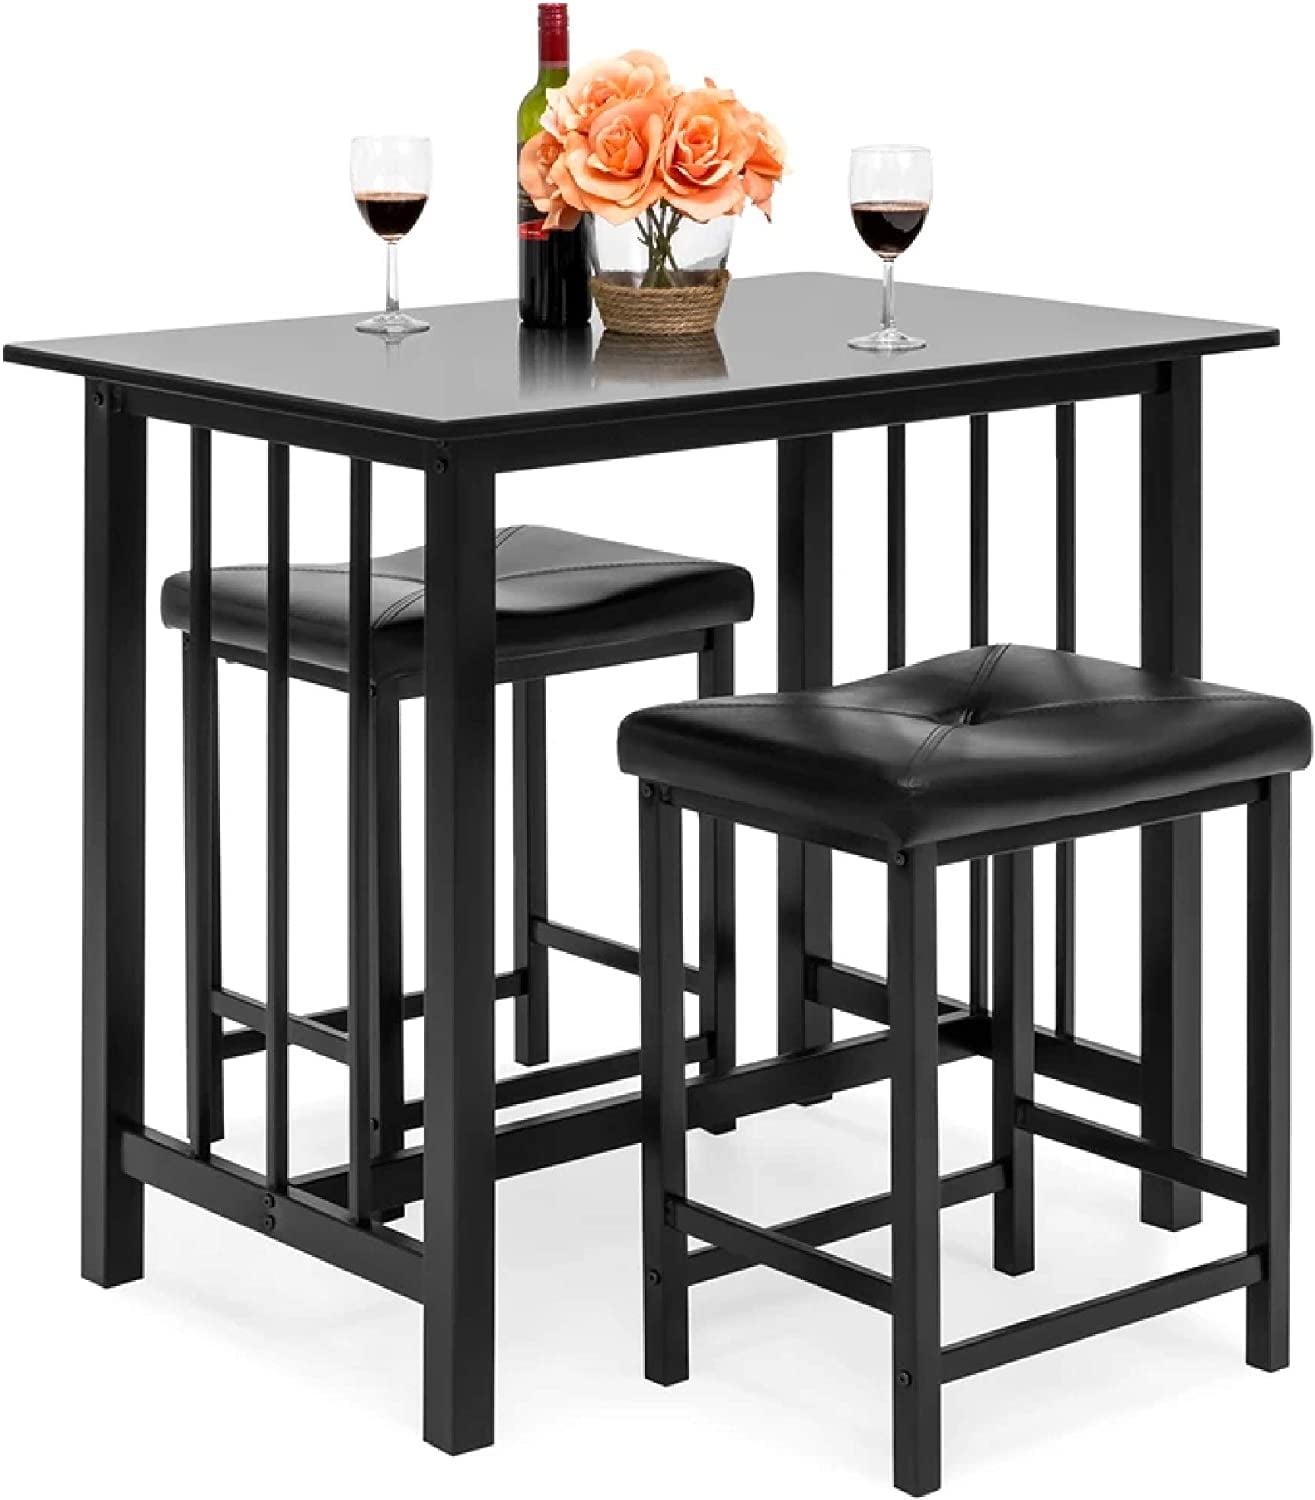 Compact 3-Piece Counter-Height Dining Set with Faux Leather Stools - Black